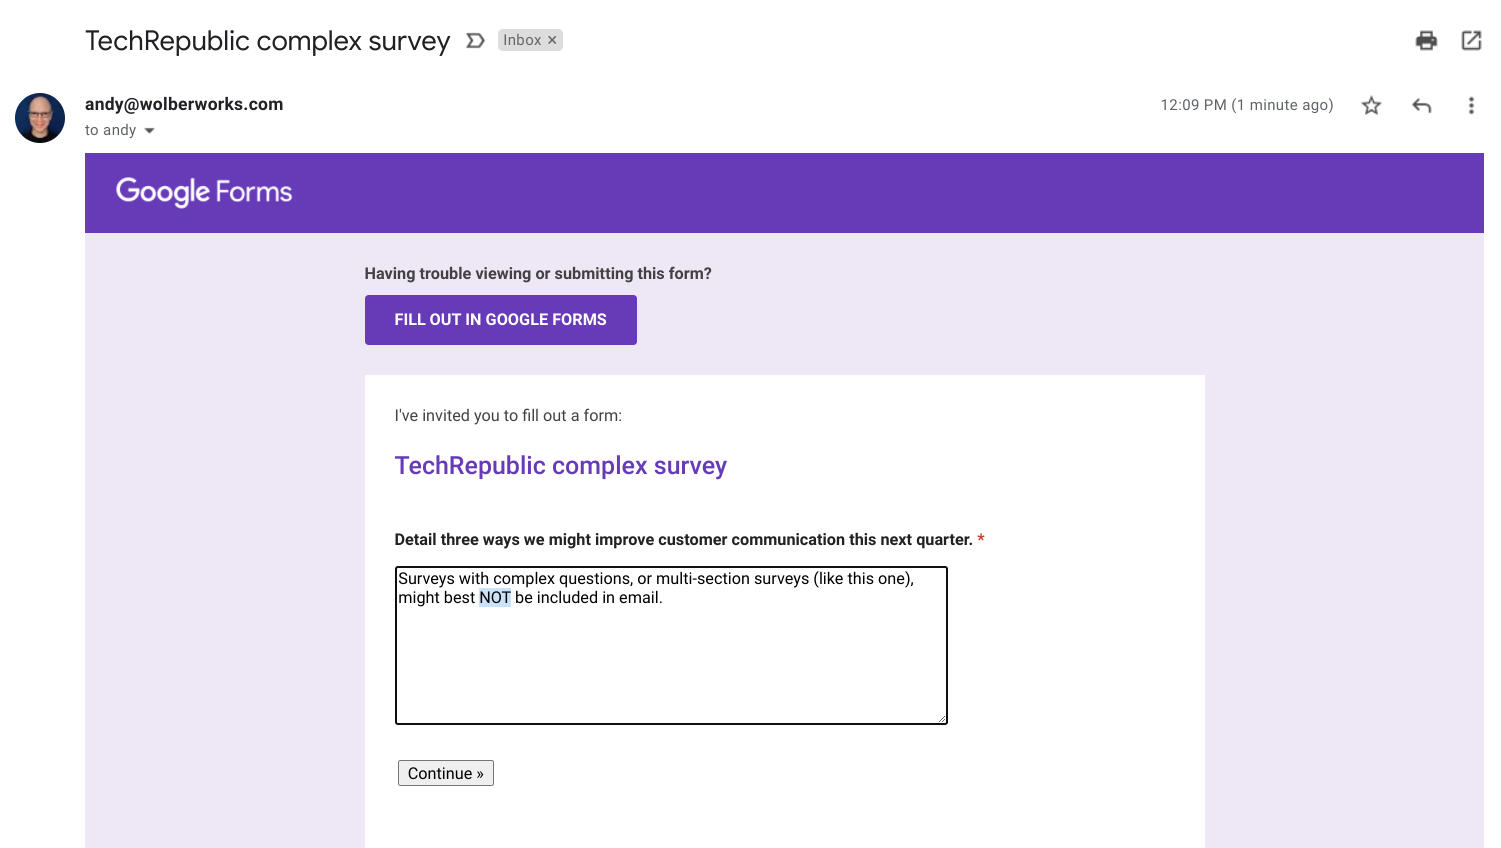 Screenshot of email from Google Forms, with "Continue" button displayed after a single, free form long text box.